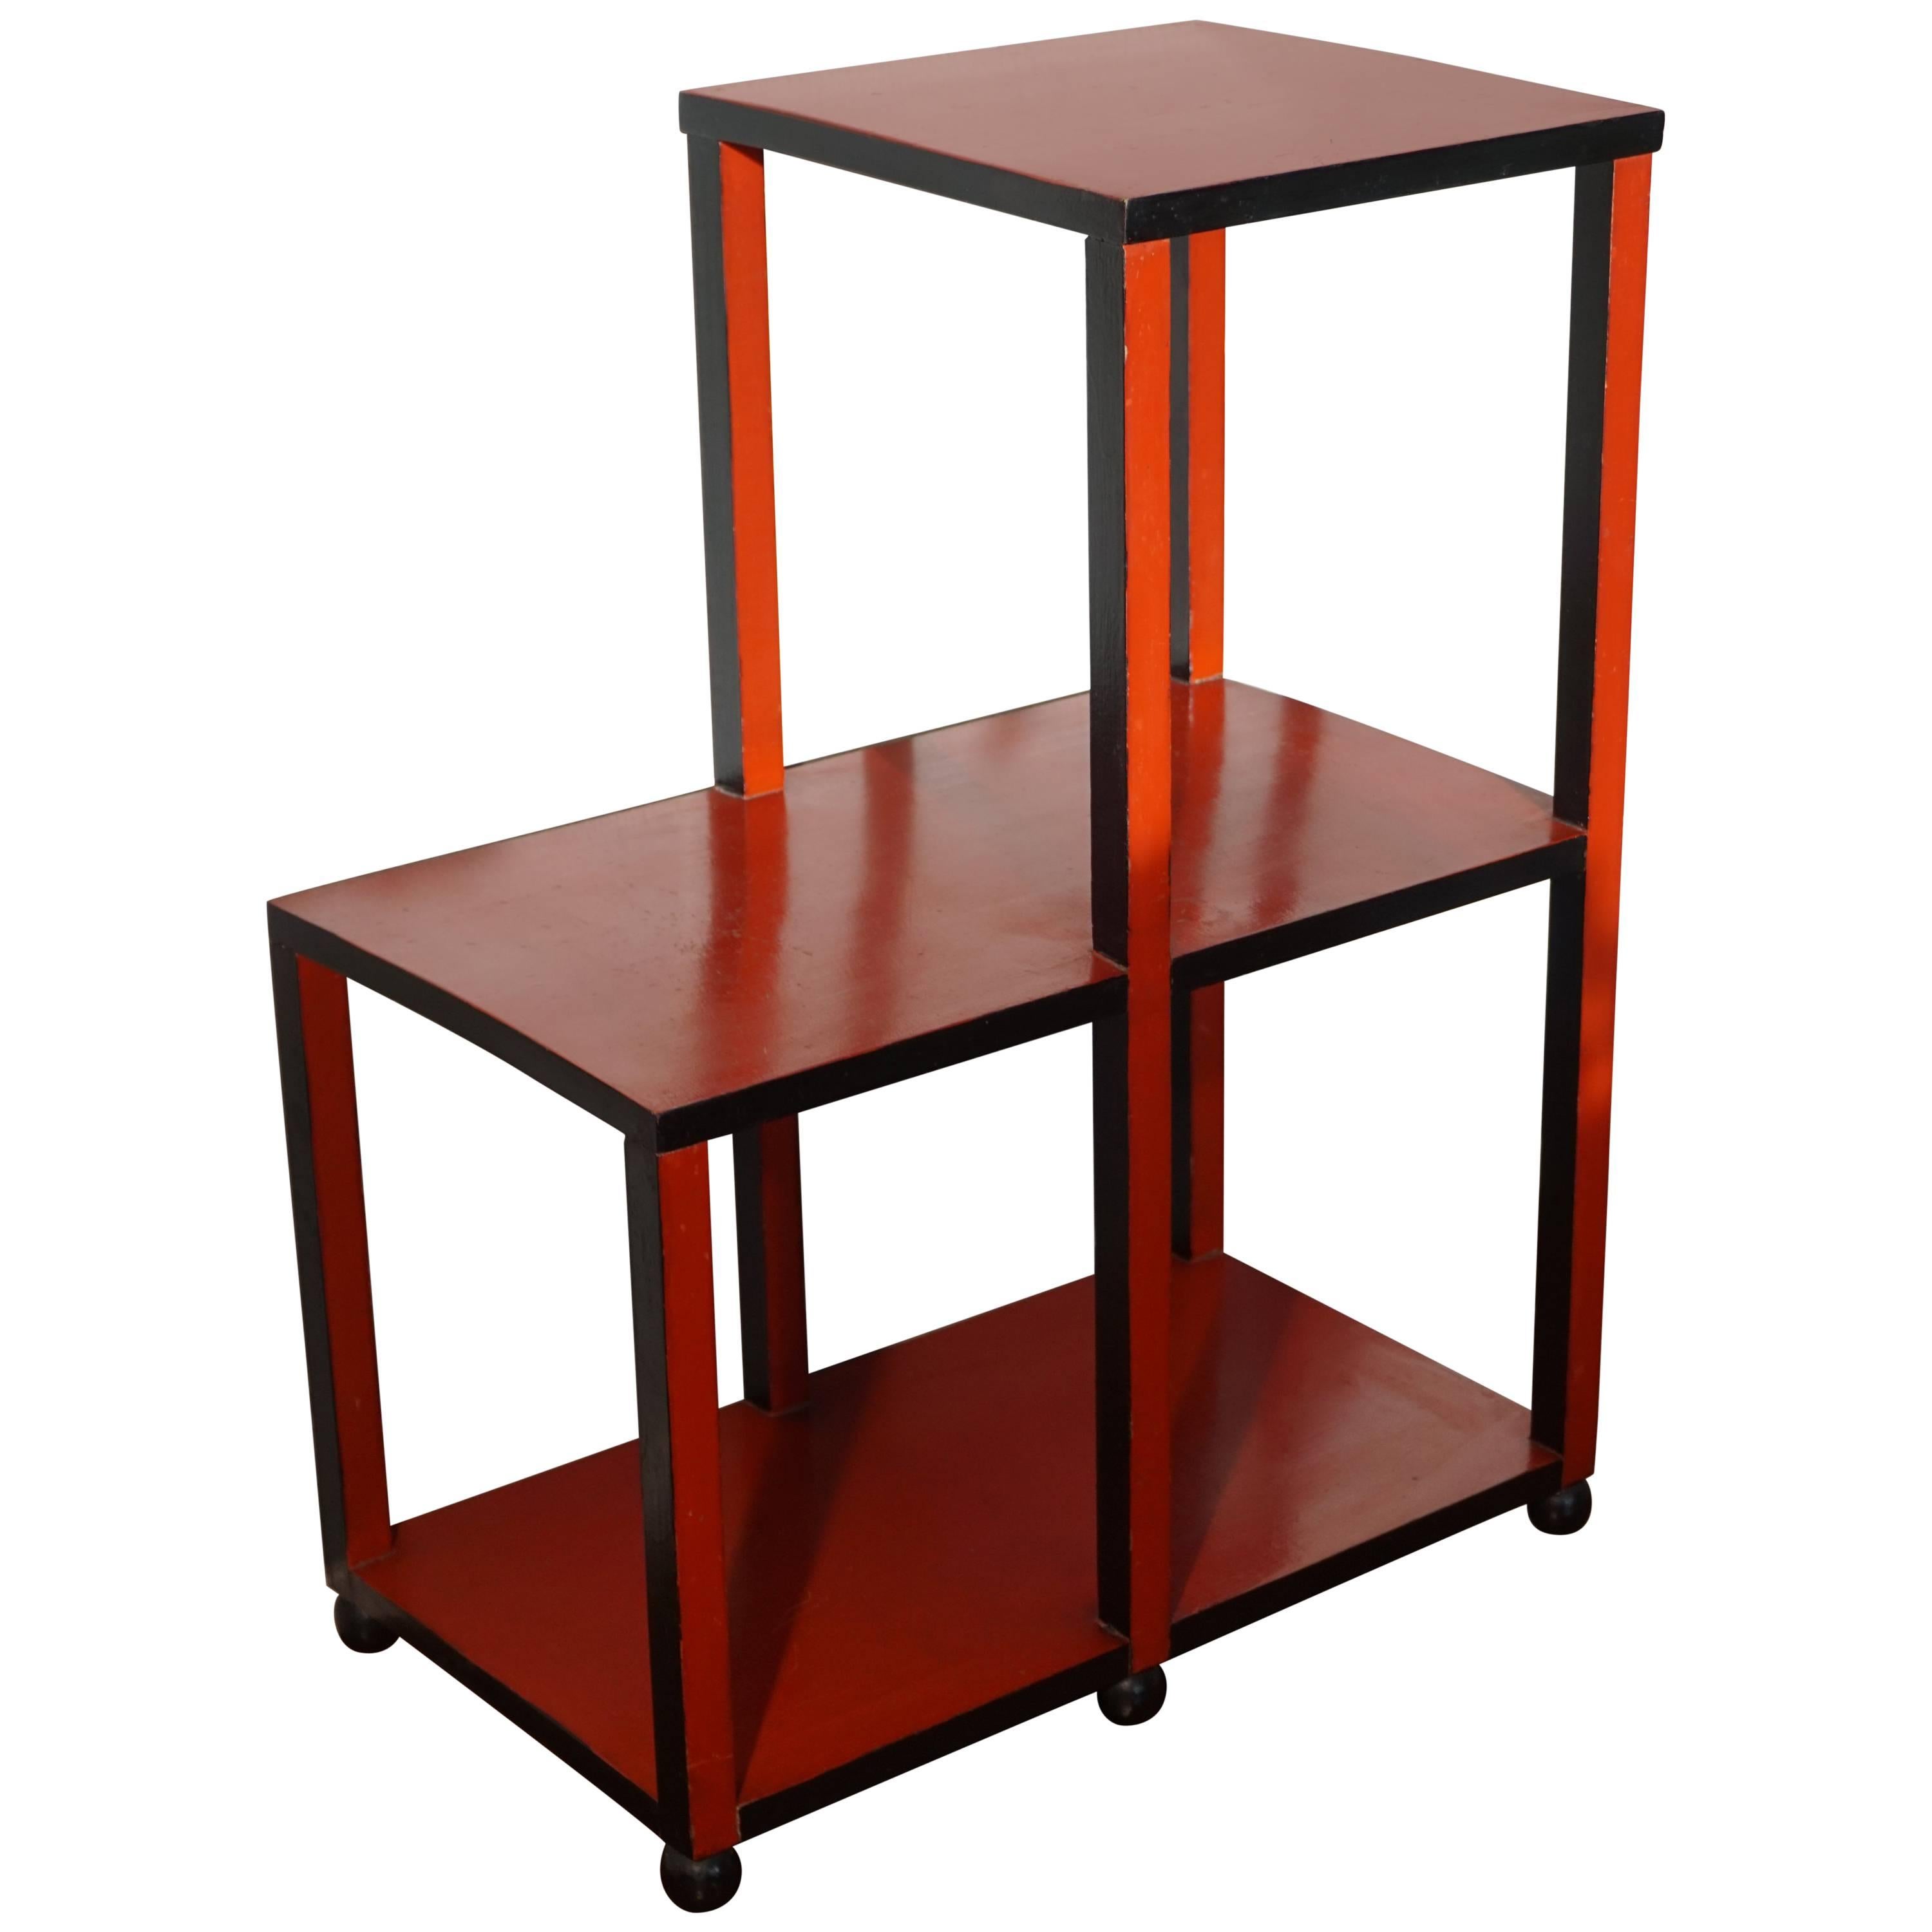 Unique Art Deco Amsterdam School Red & Black Lacquered Etagere Stand Small Table